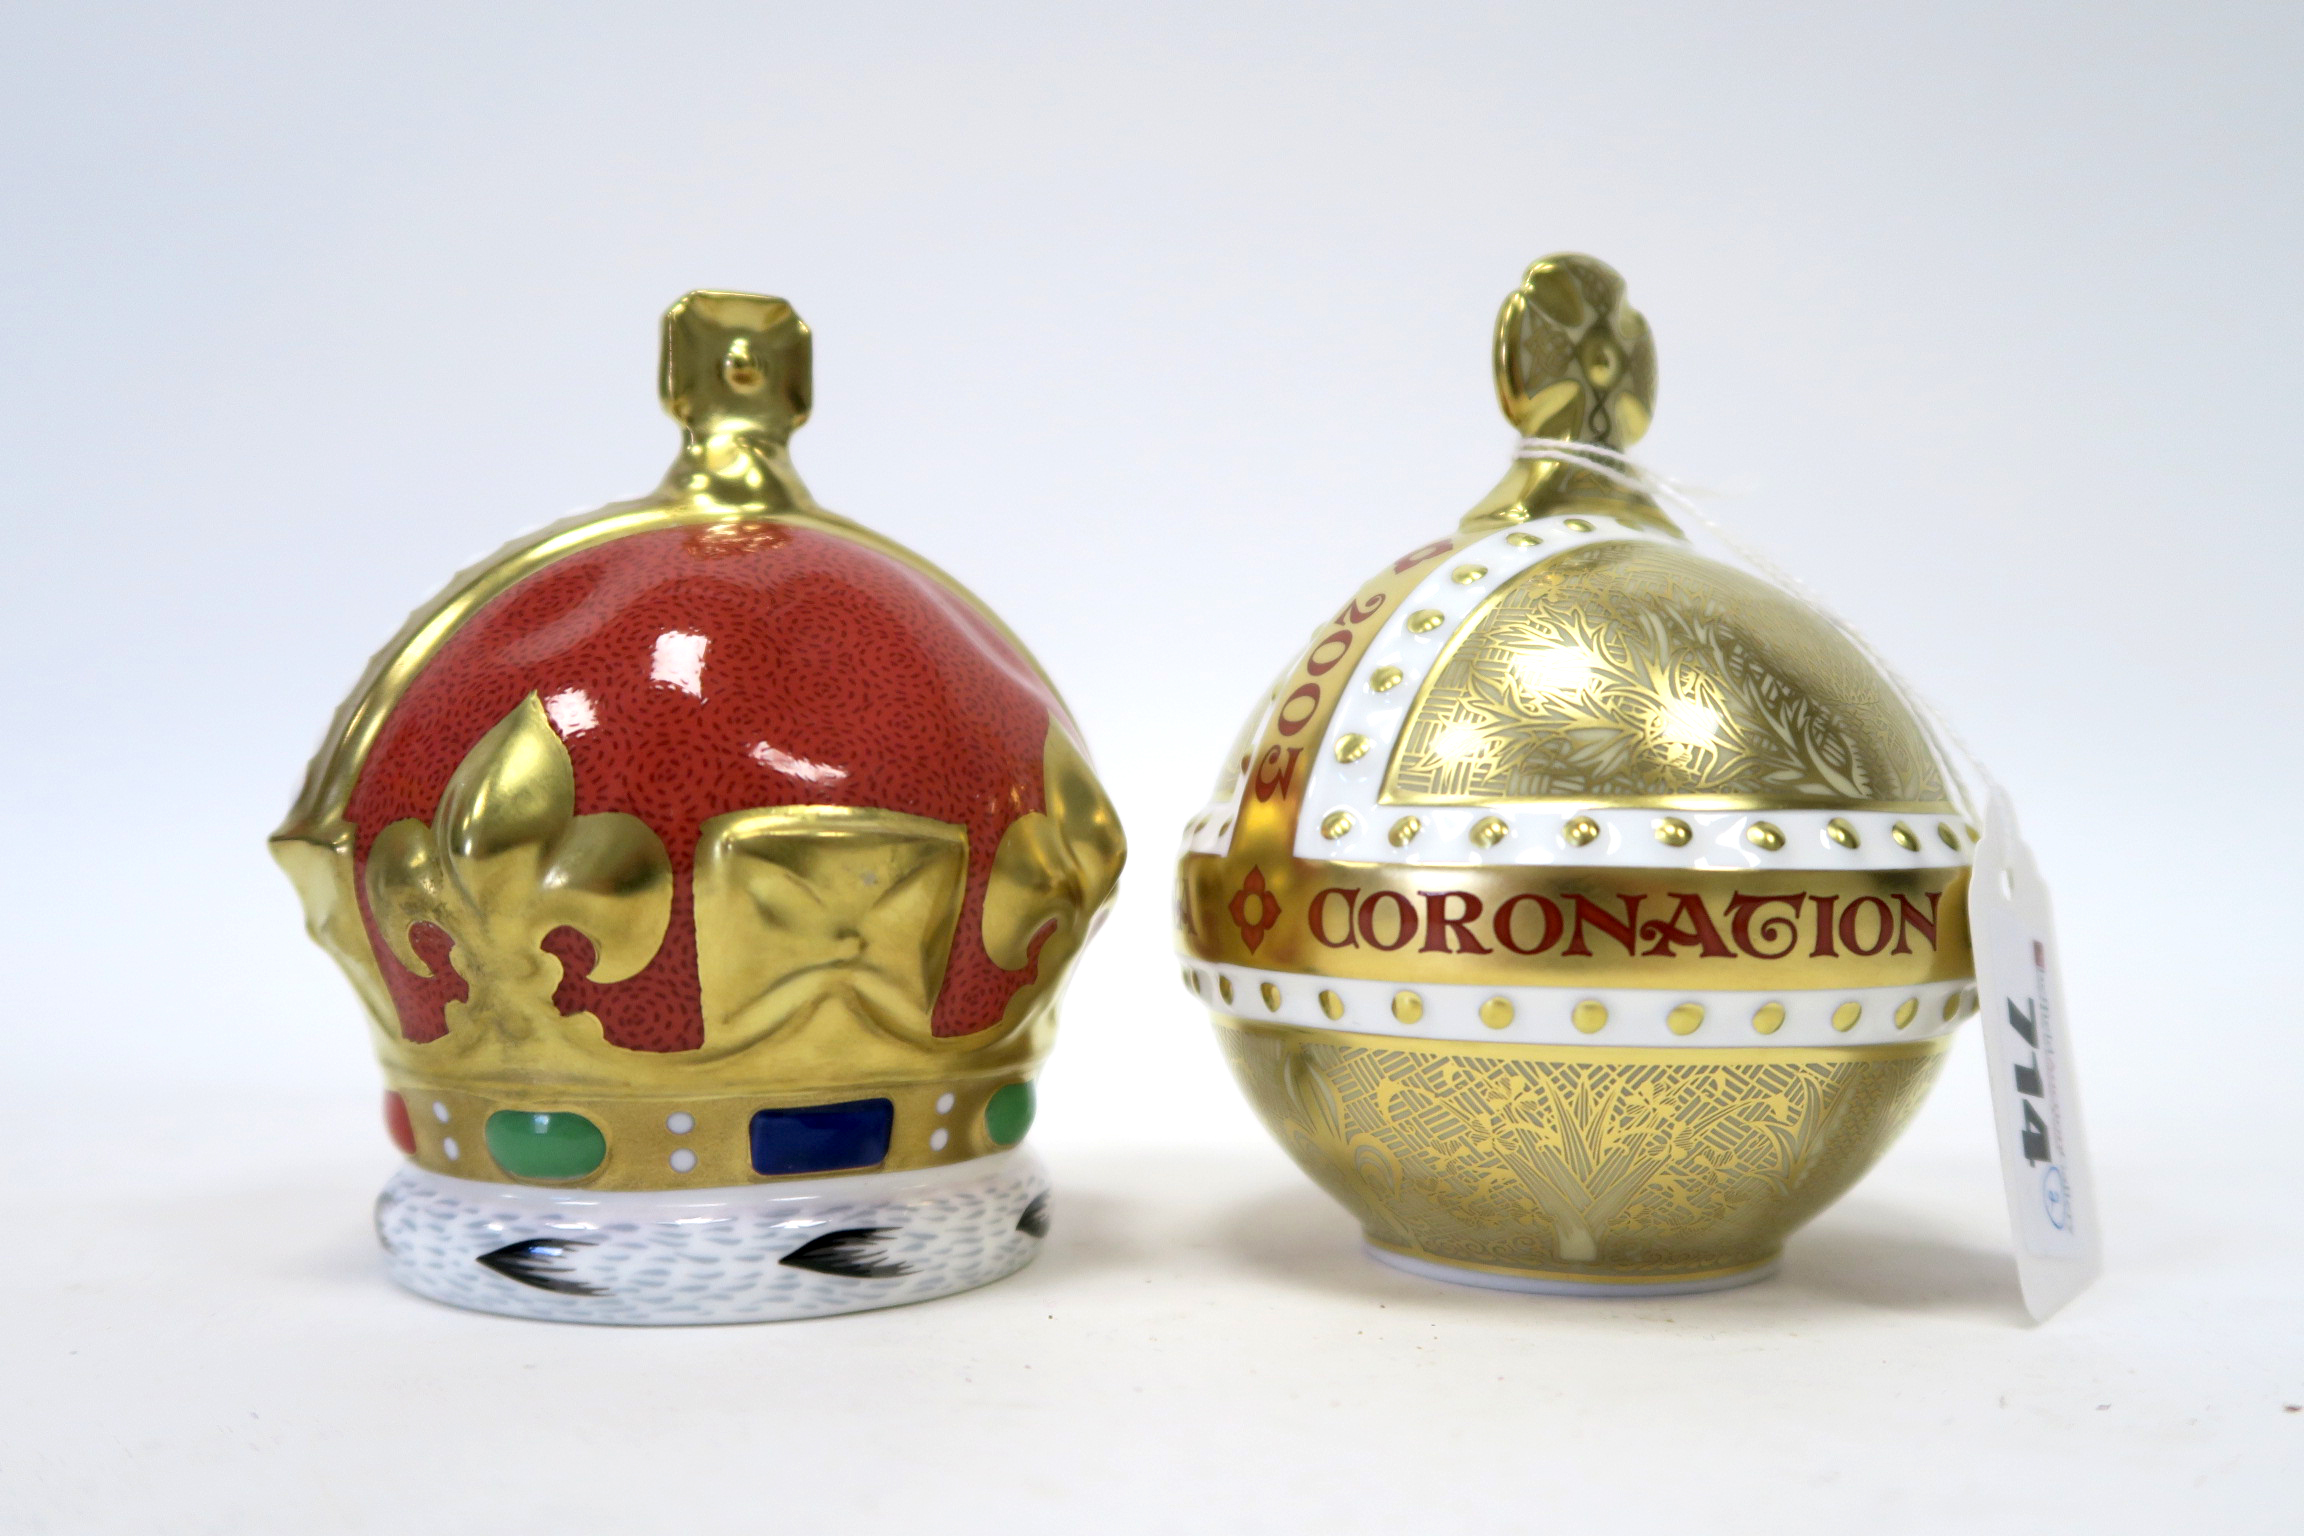 A Royal Crown Derby Porcelain Paperweight 'Coronation Orb', commissioned by Goviers of Sidmouth to